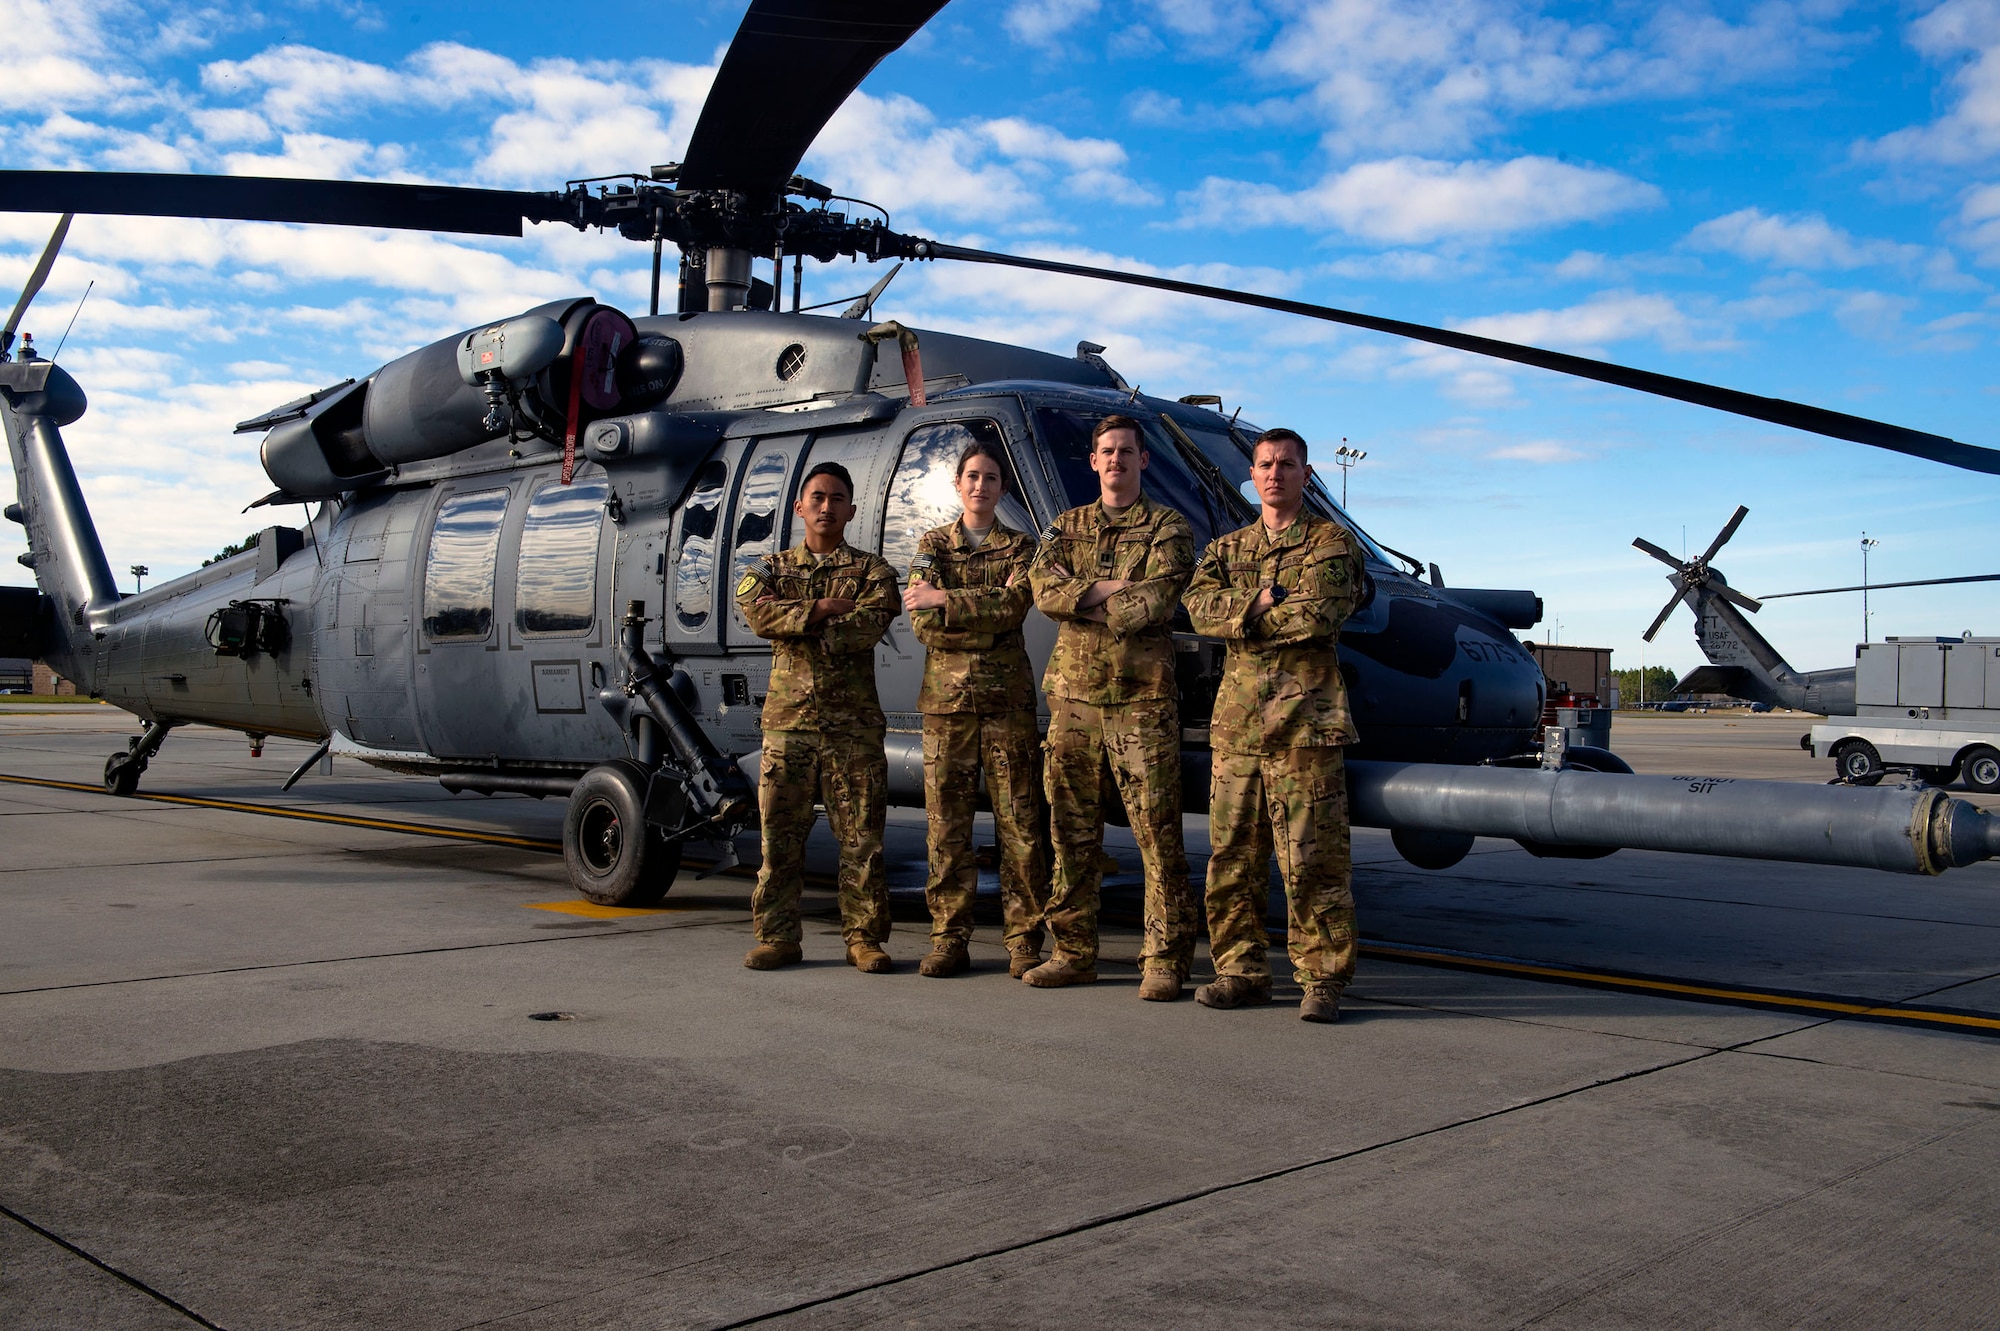 A 41st Rescue Squadron HH-60G Pave Hawk helicopter ‘hard crew’ poses for a photo, Jan. 11, 2019, at Moody Air Force Base, Ga. To optimally perform their Combat Search and Rescue mission downrange, the 347th Rescue Group implemented the advanced training ‘hard crew’ system, which unifies the 38th and 41st RQS’s into separate rescue operator teams that’ll fly every mission together for their upcoming deployment. This concept establishes continuity and chemistry which will help maximize the 38th and 41st RQS’s mission readiness by simultaneously working together to build relationships and understand each other’s idiosyncrasies, strengths, and weaknesses to ultimately improve the team’s performance in mission execution. (U.S. Air Force photo by Senior Airman Greg Nash)